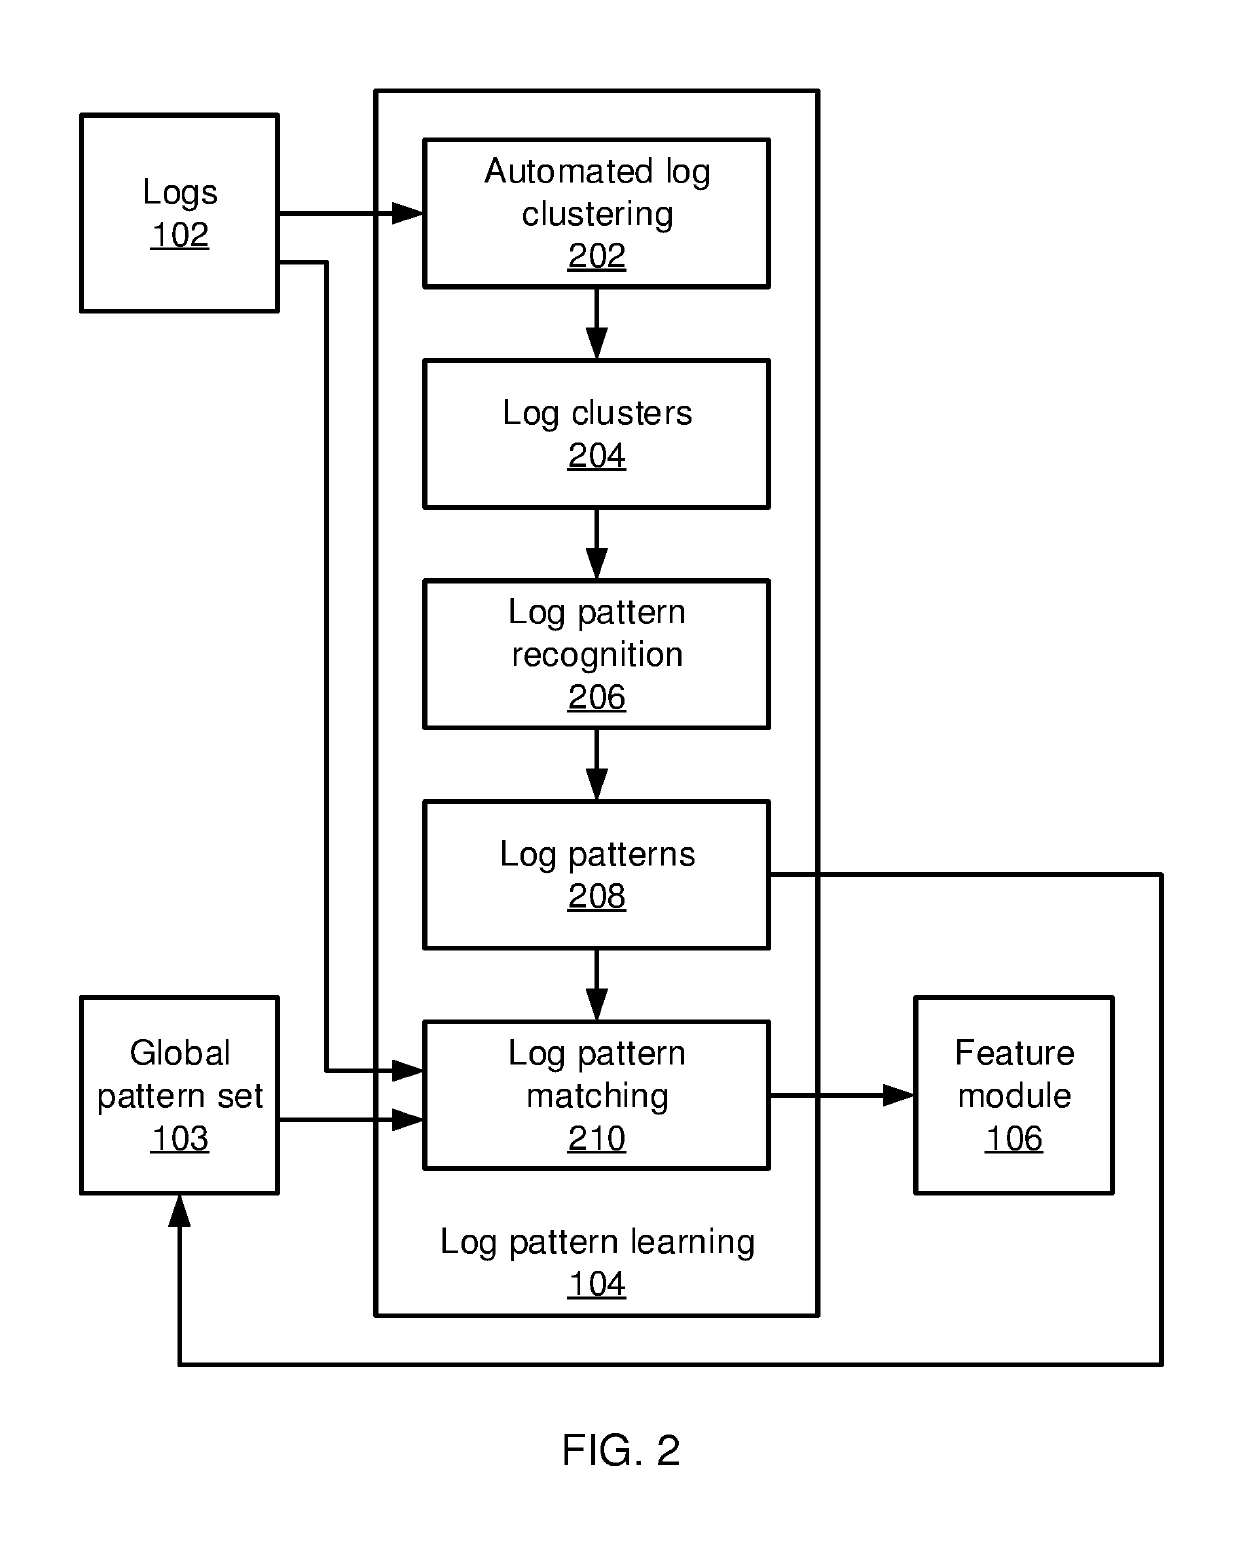 System failure prediction using long short-term memory neural networks